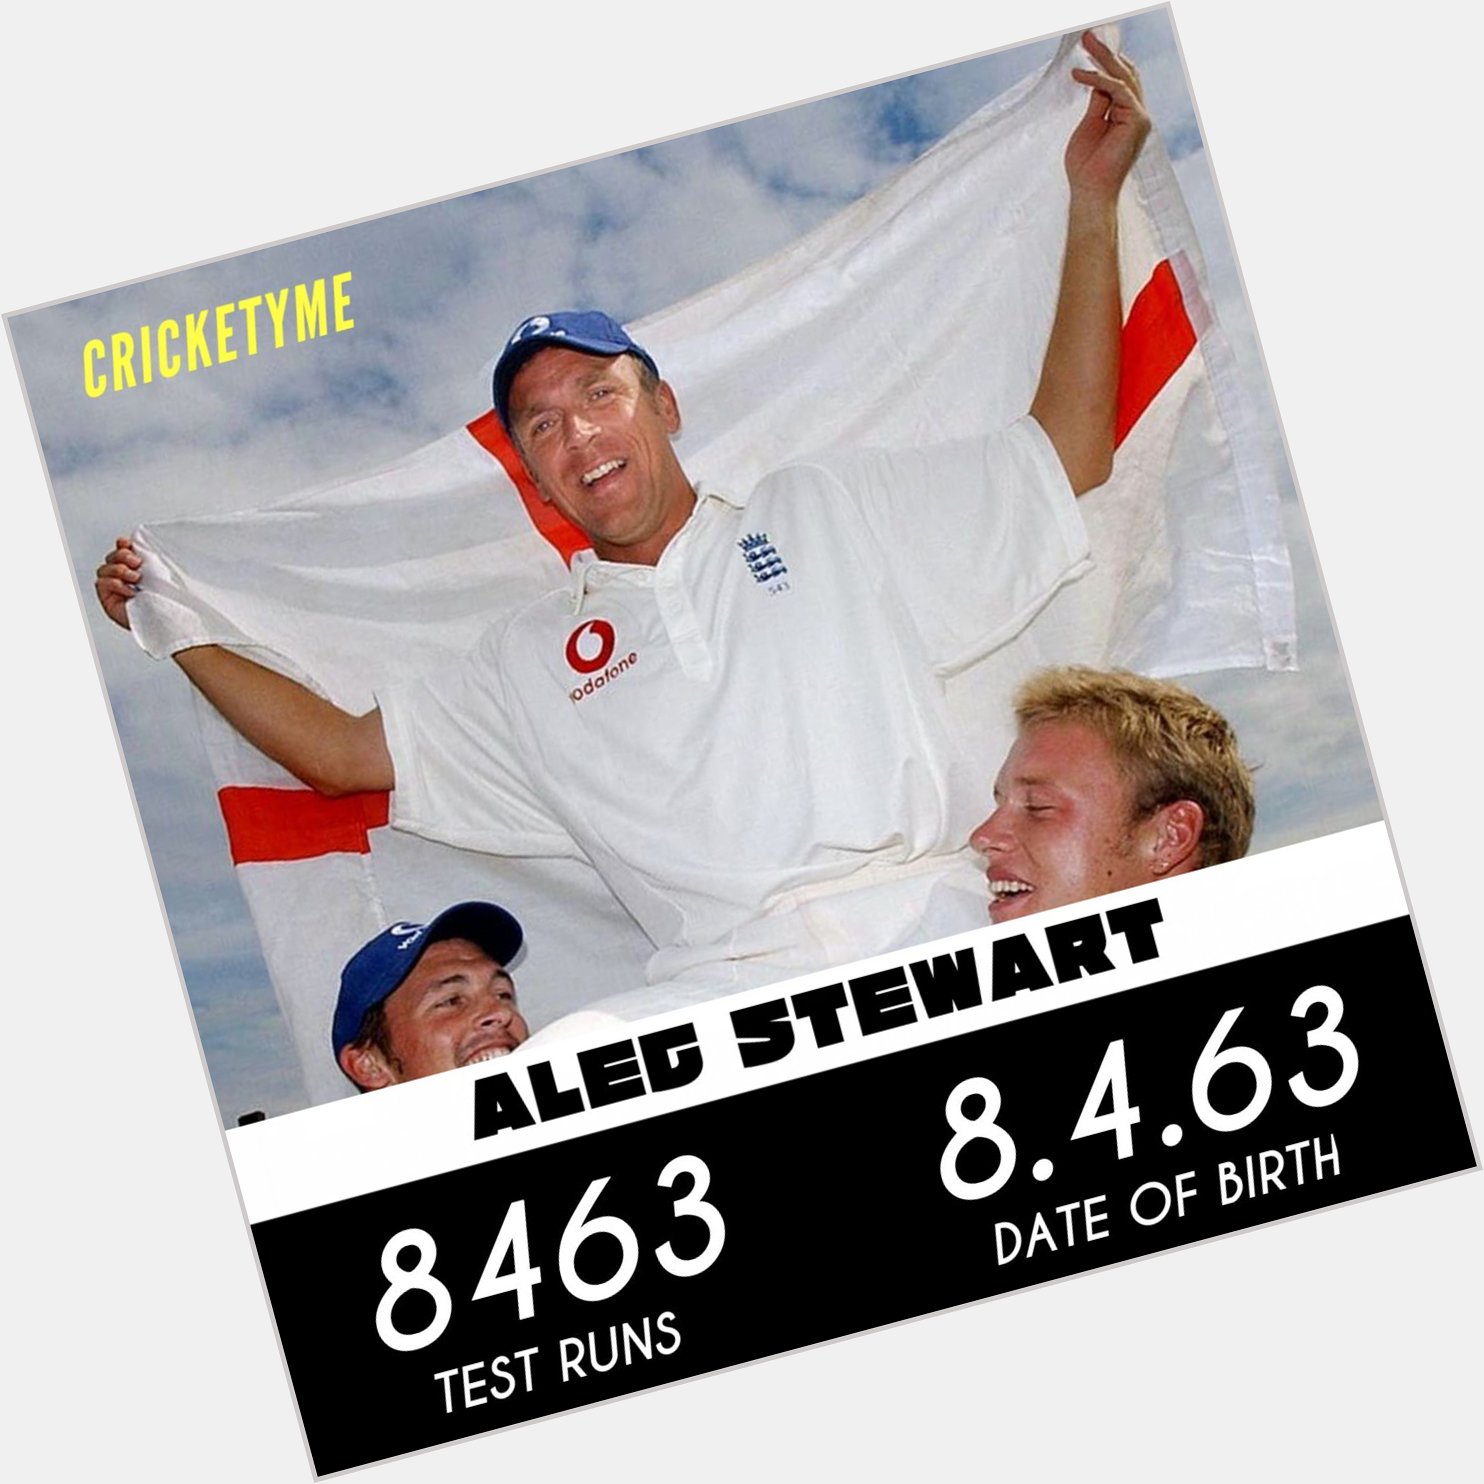 Happy Birthday, Alec Stewart! 

Does he possess the greatest cricket stat ever? 